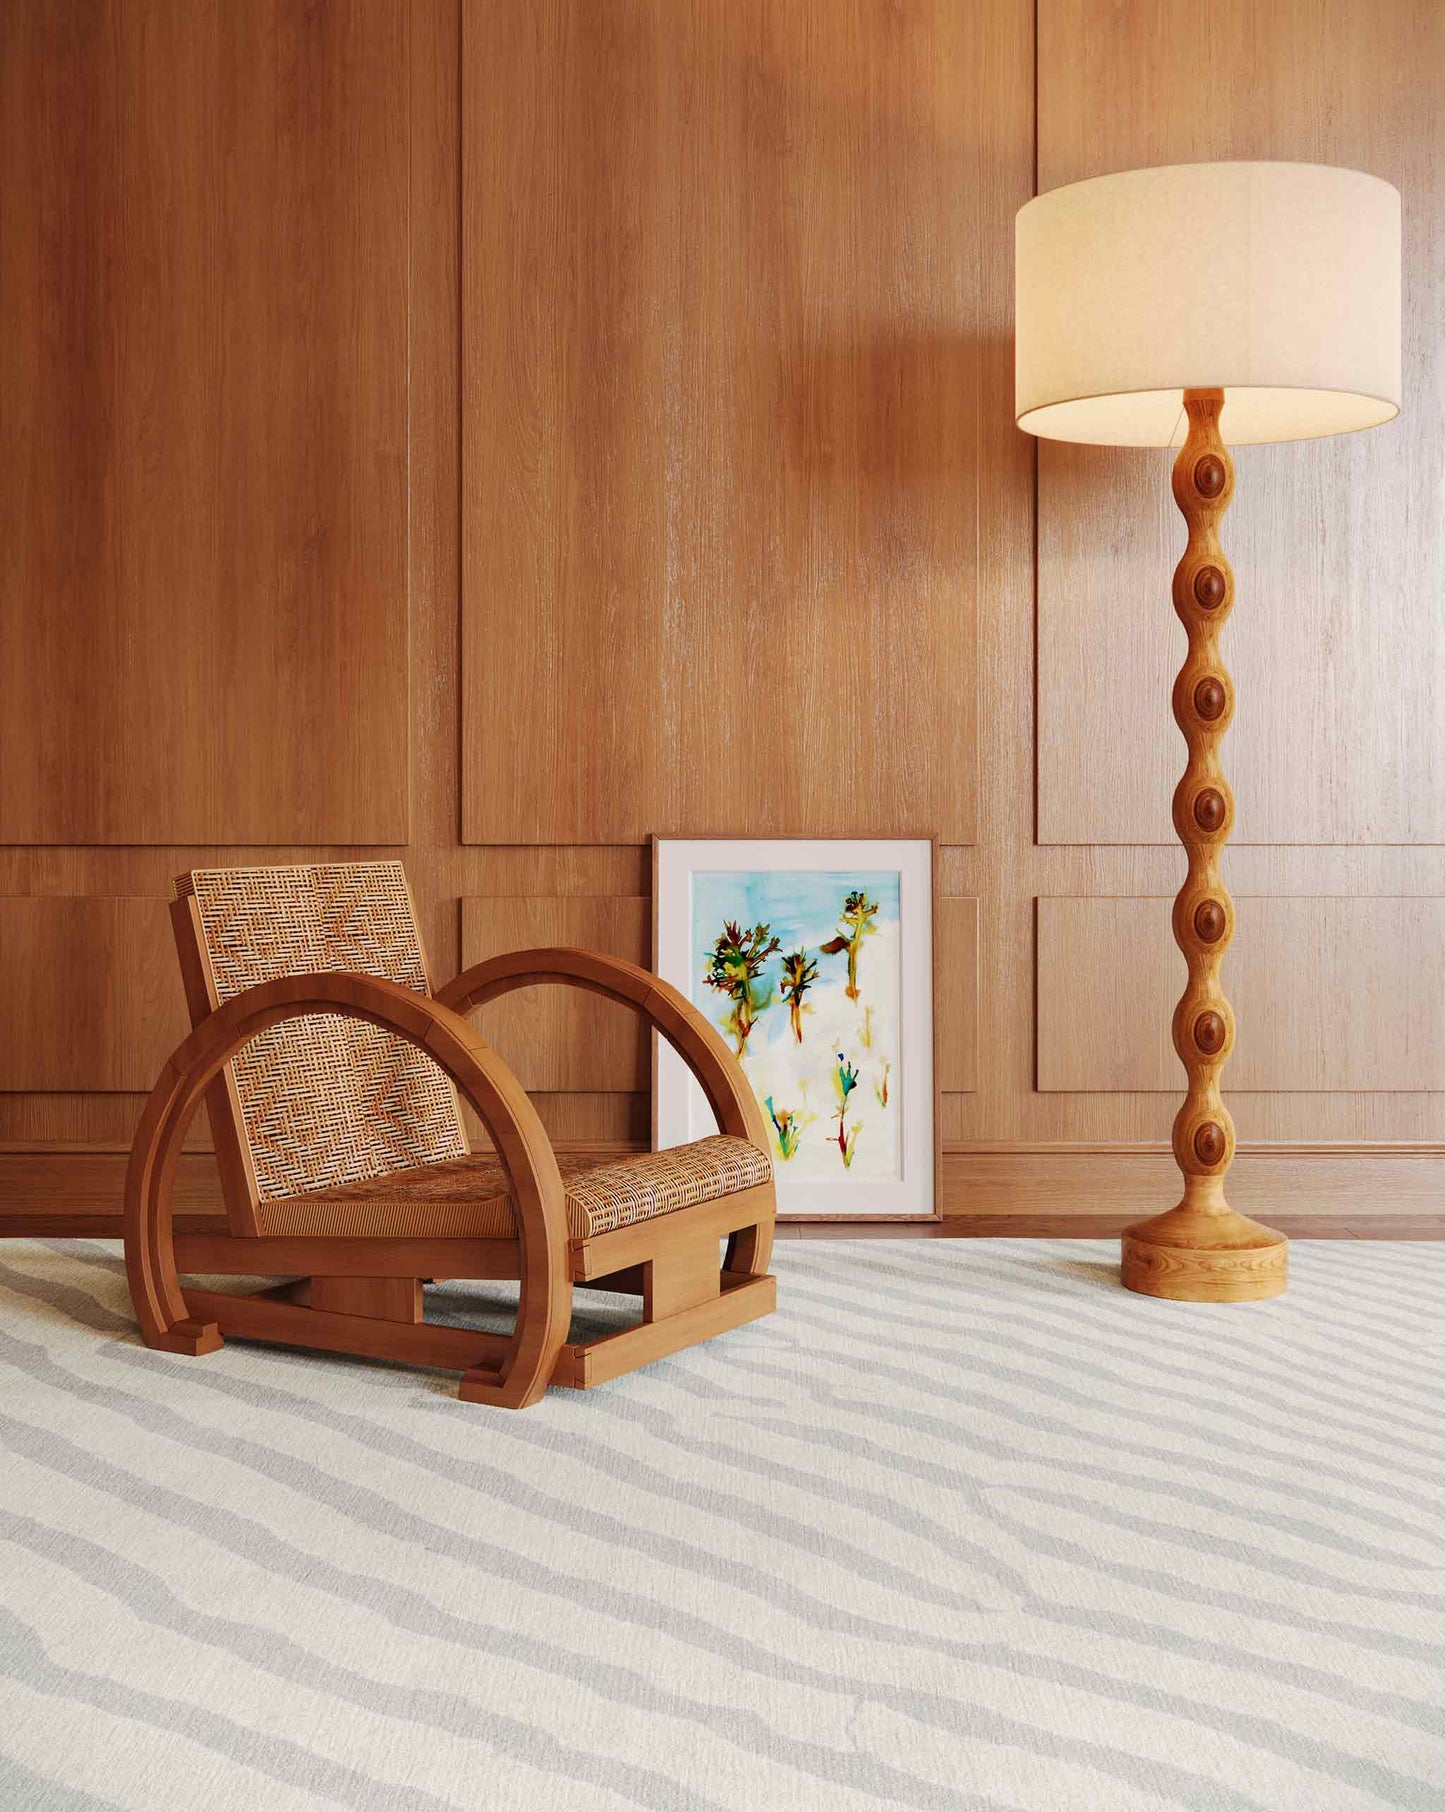 Eskayel’s Sand Lines rug in Sand offers a beige and grey colorway installed in a living room with a wood and rattan chair, photo frame, and a standing lamp. 